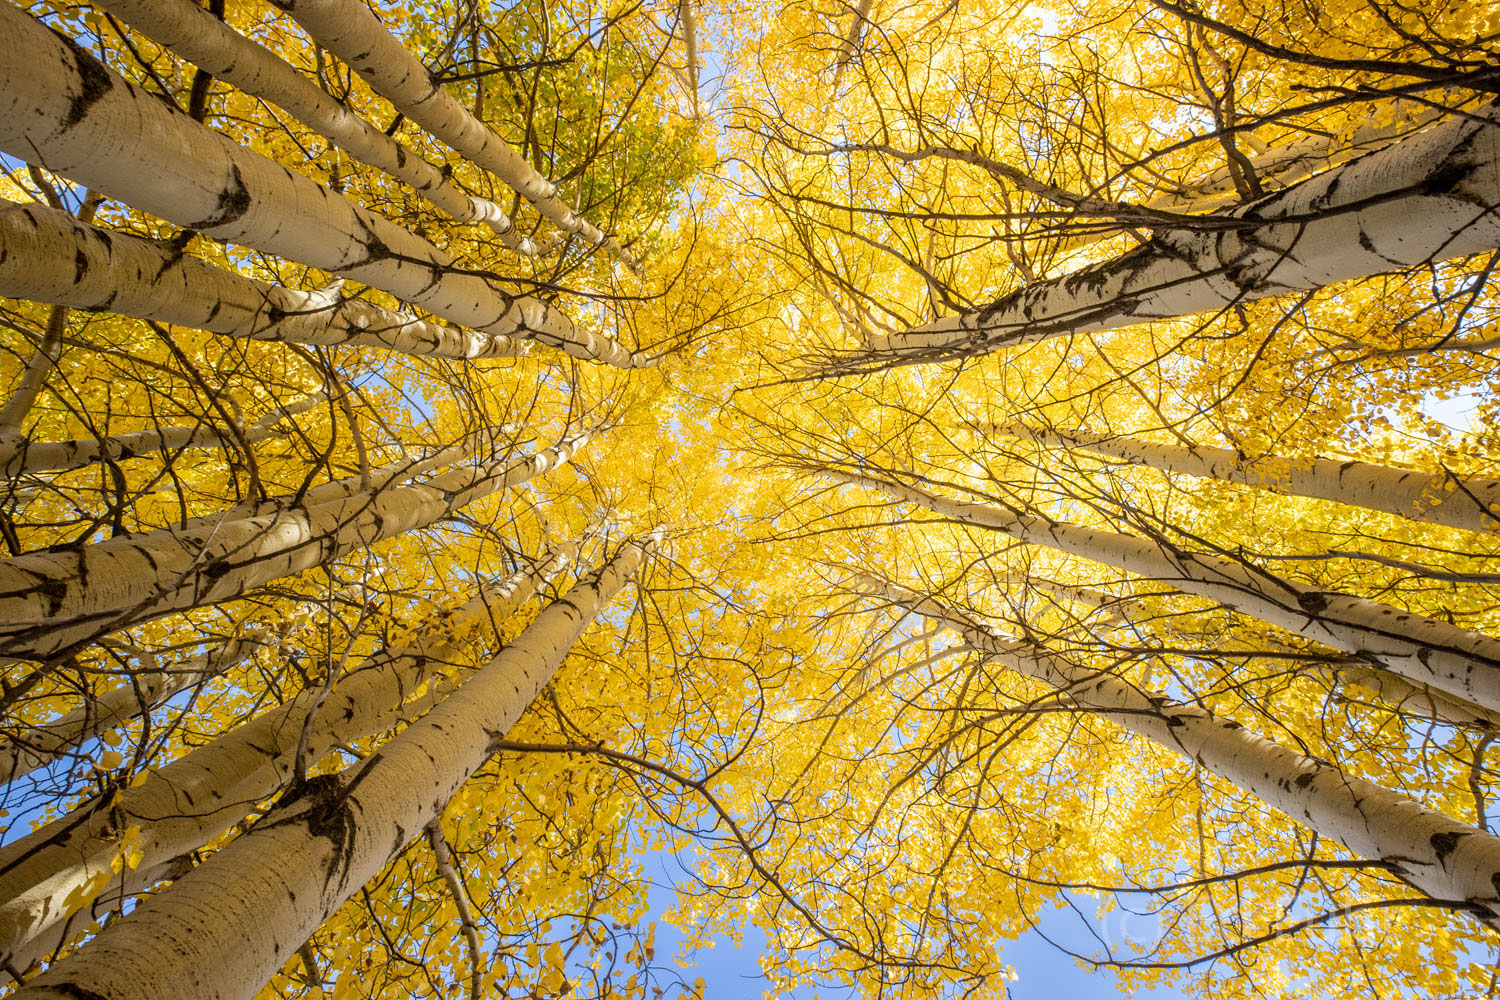 Into the high blue sky above, a grove of aspen, with their finest golden coat ablaze, stretches higher and higher, creating a...